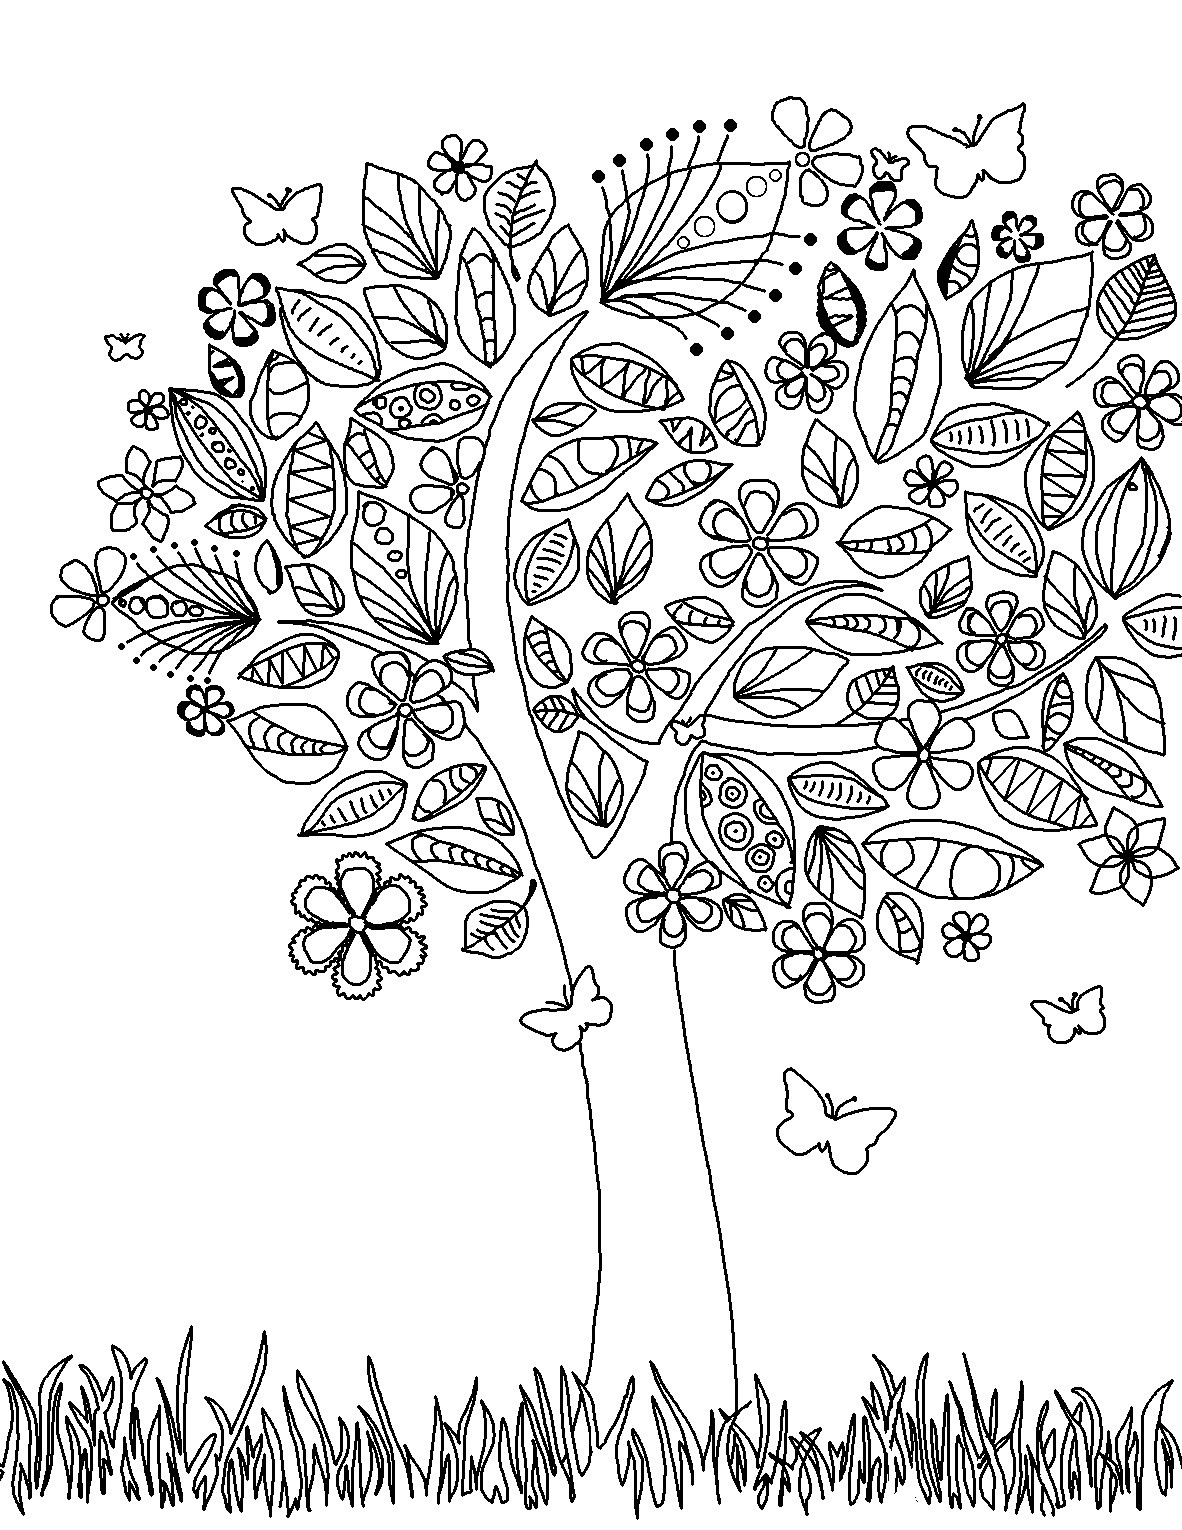 Printable Coloring Pages Adults Free
 Free Printable Adult Coloring Pages